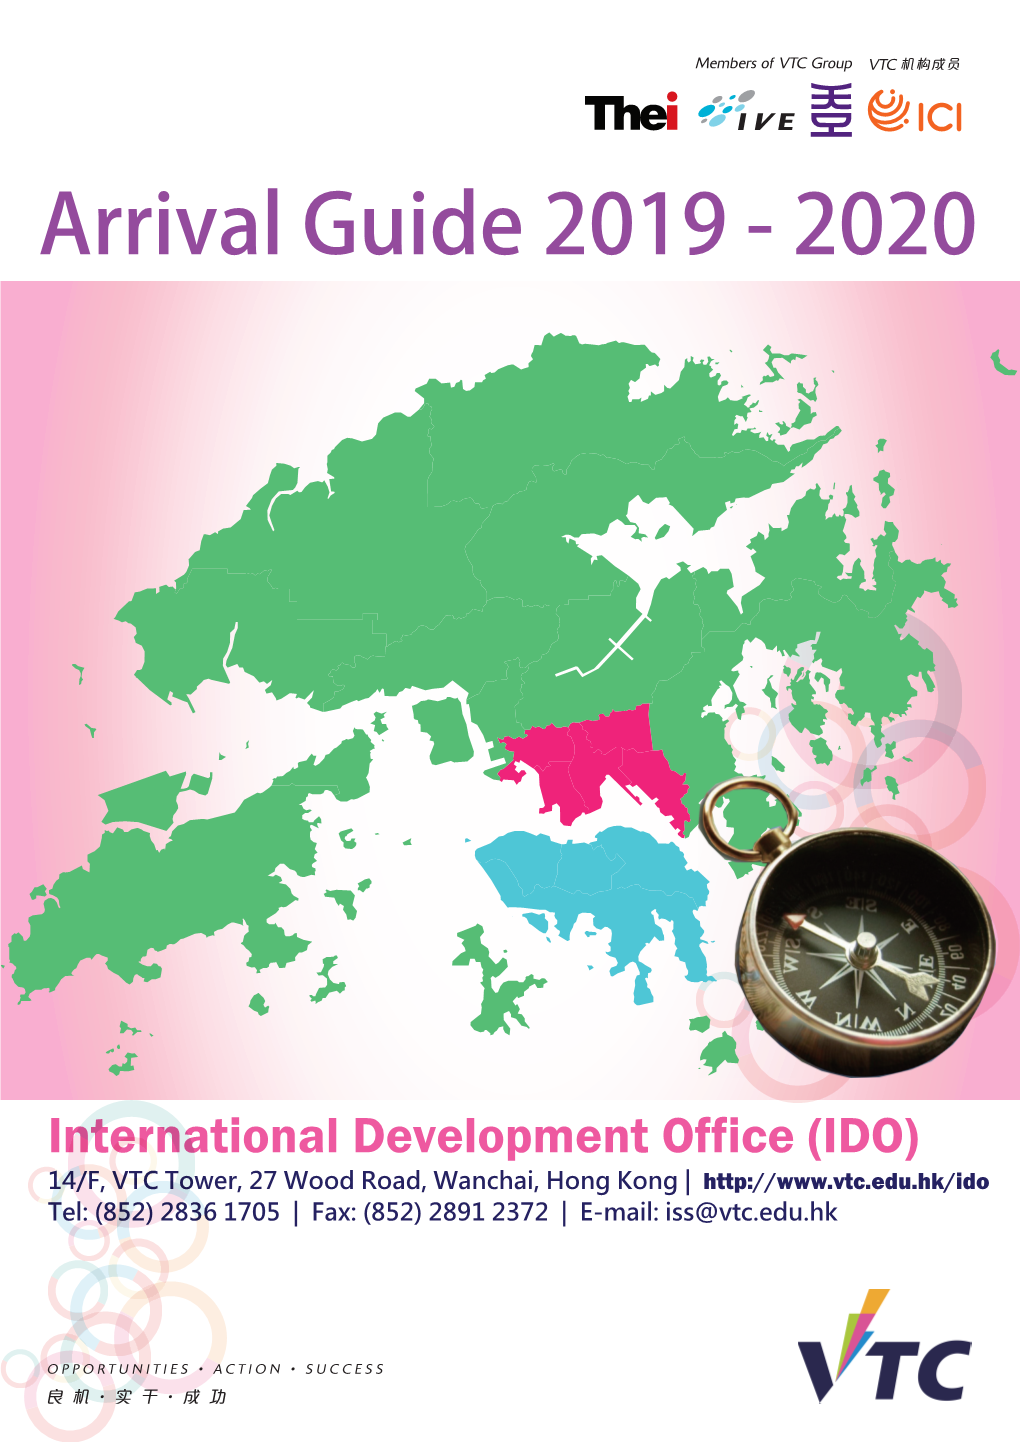 Arrival Guide 2019 - 2020